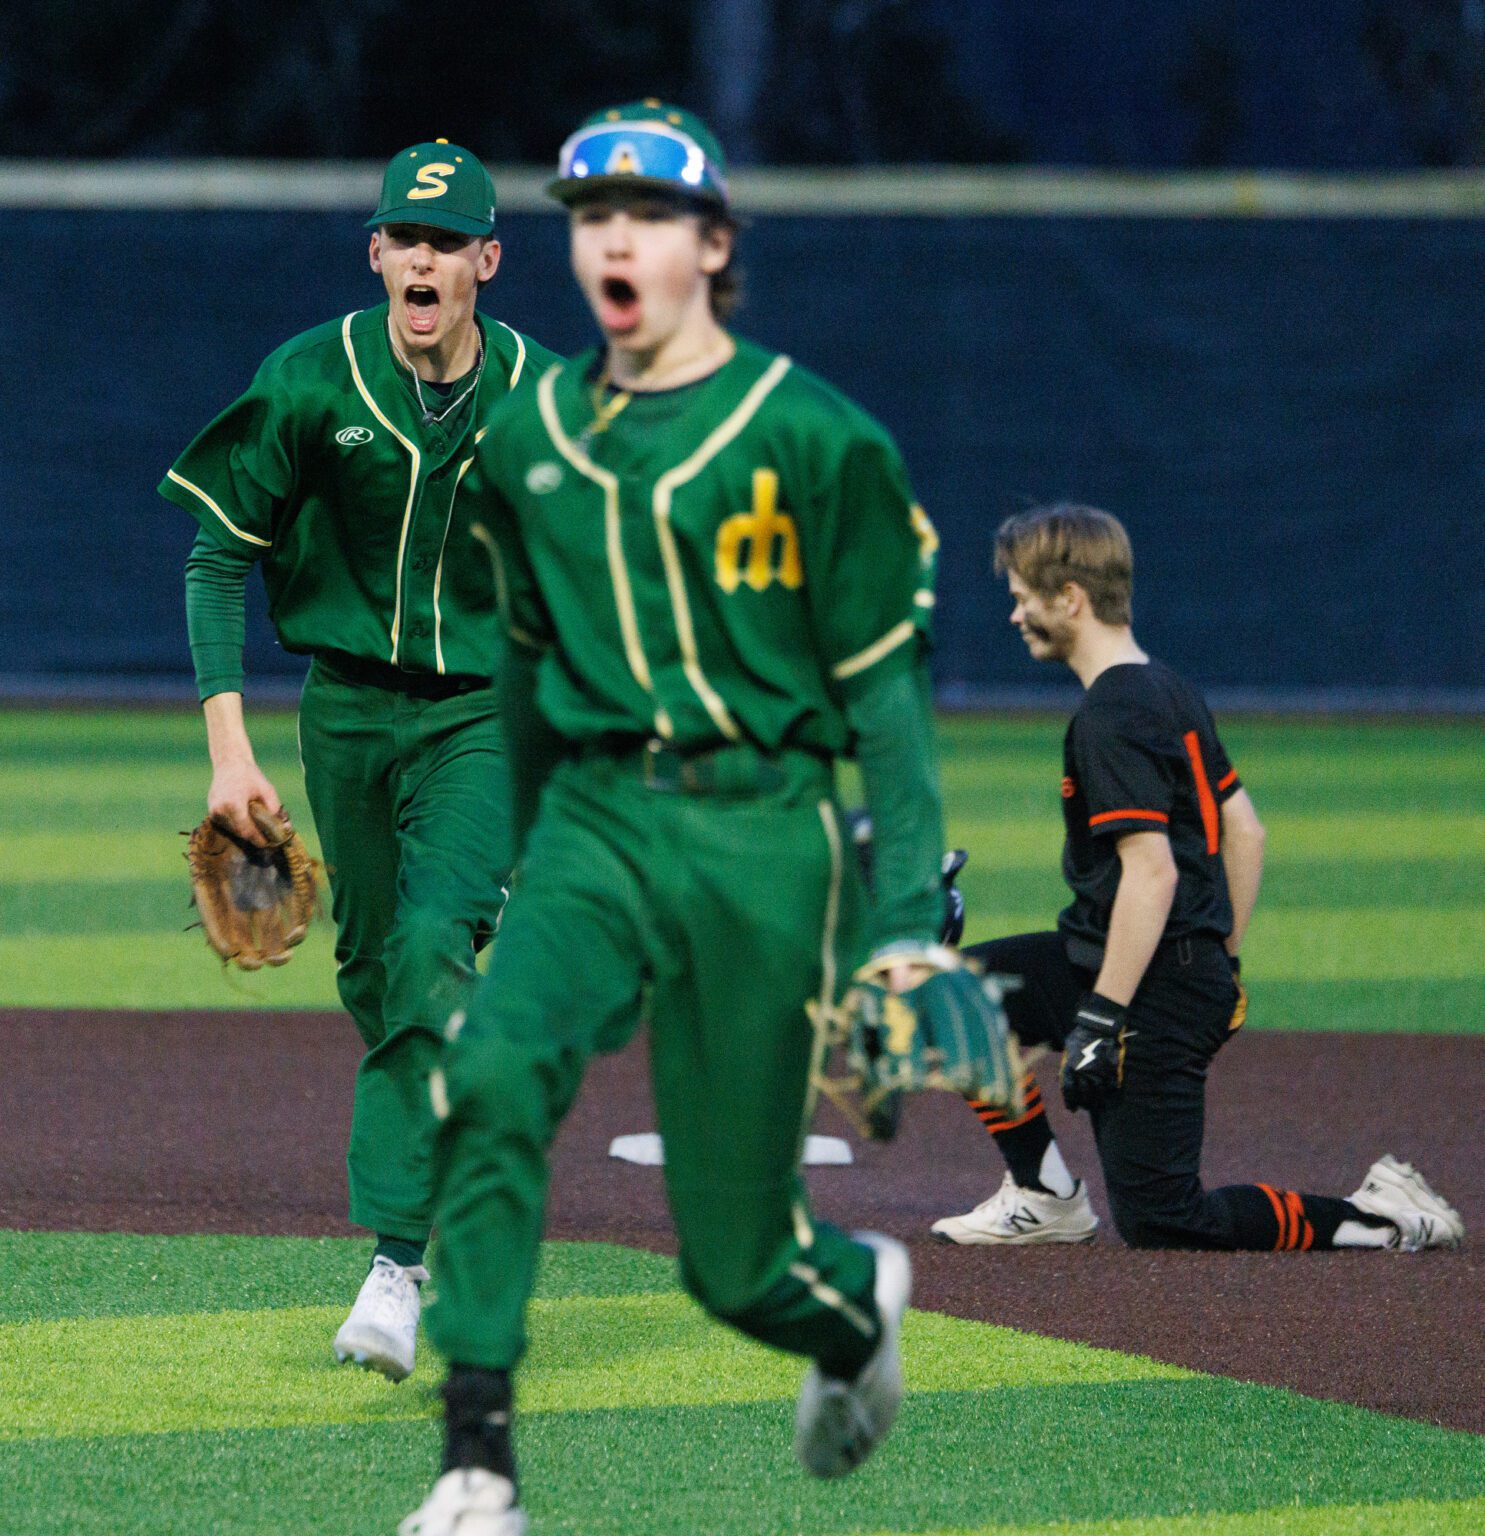 After making double play to end the game Thursday, March 21, Sehome’s Ryder McGrath, left, and Gunnar Tweit celebrate as the Mariners held on to beat Blaine 4-3 at Sehome High School.